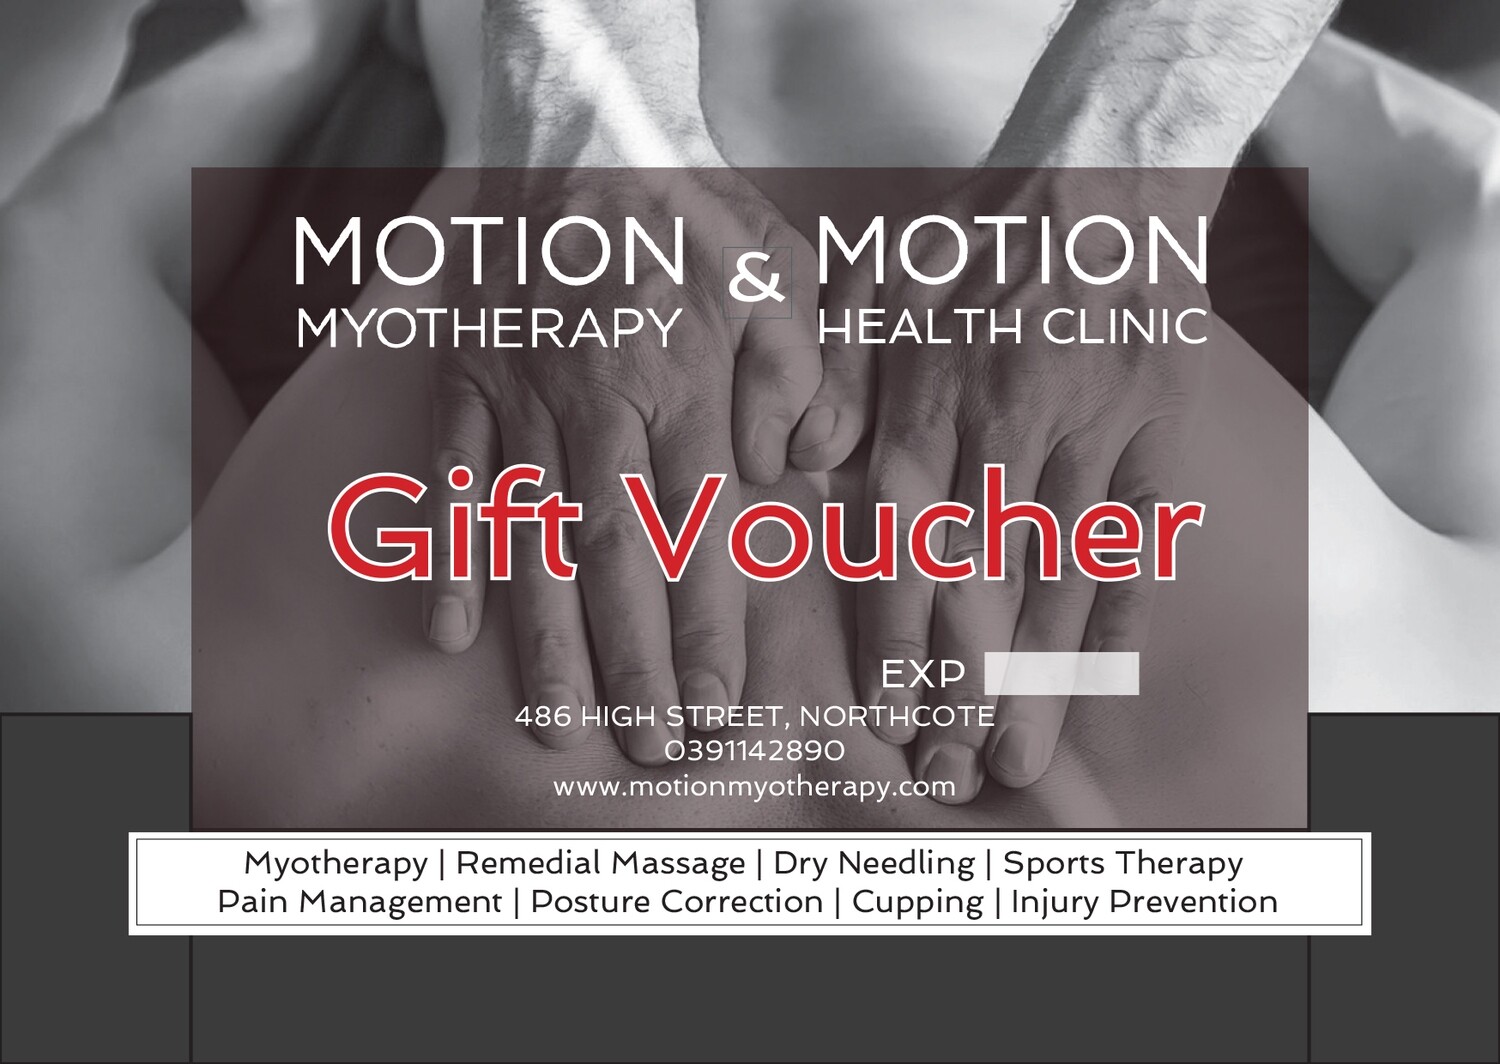 Gift Voucher for Massage and Myotherapy